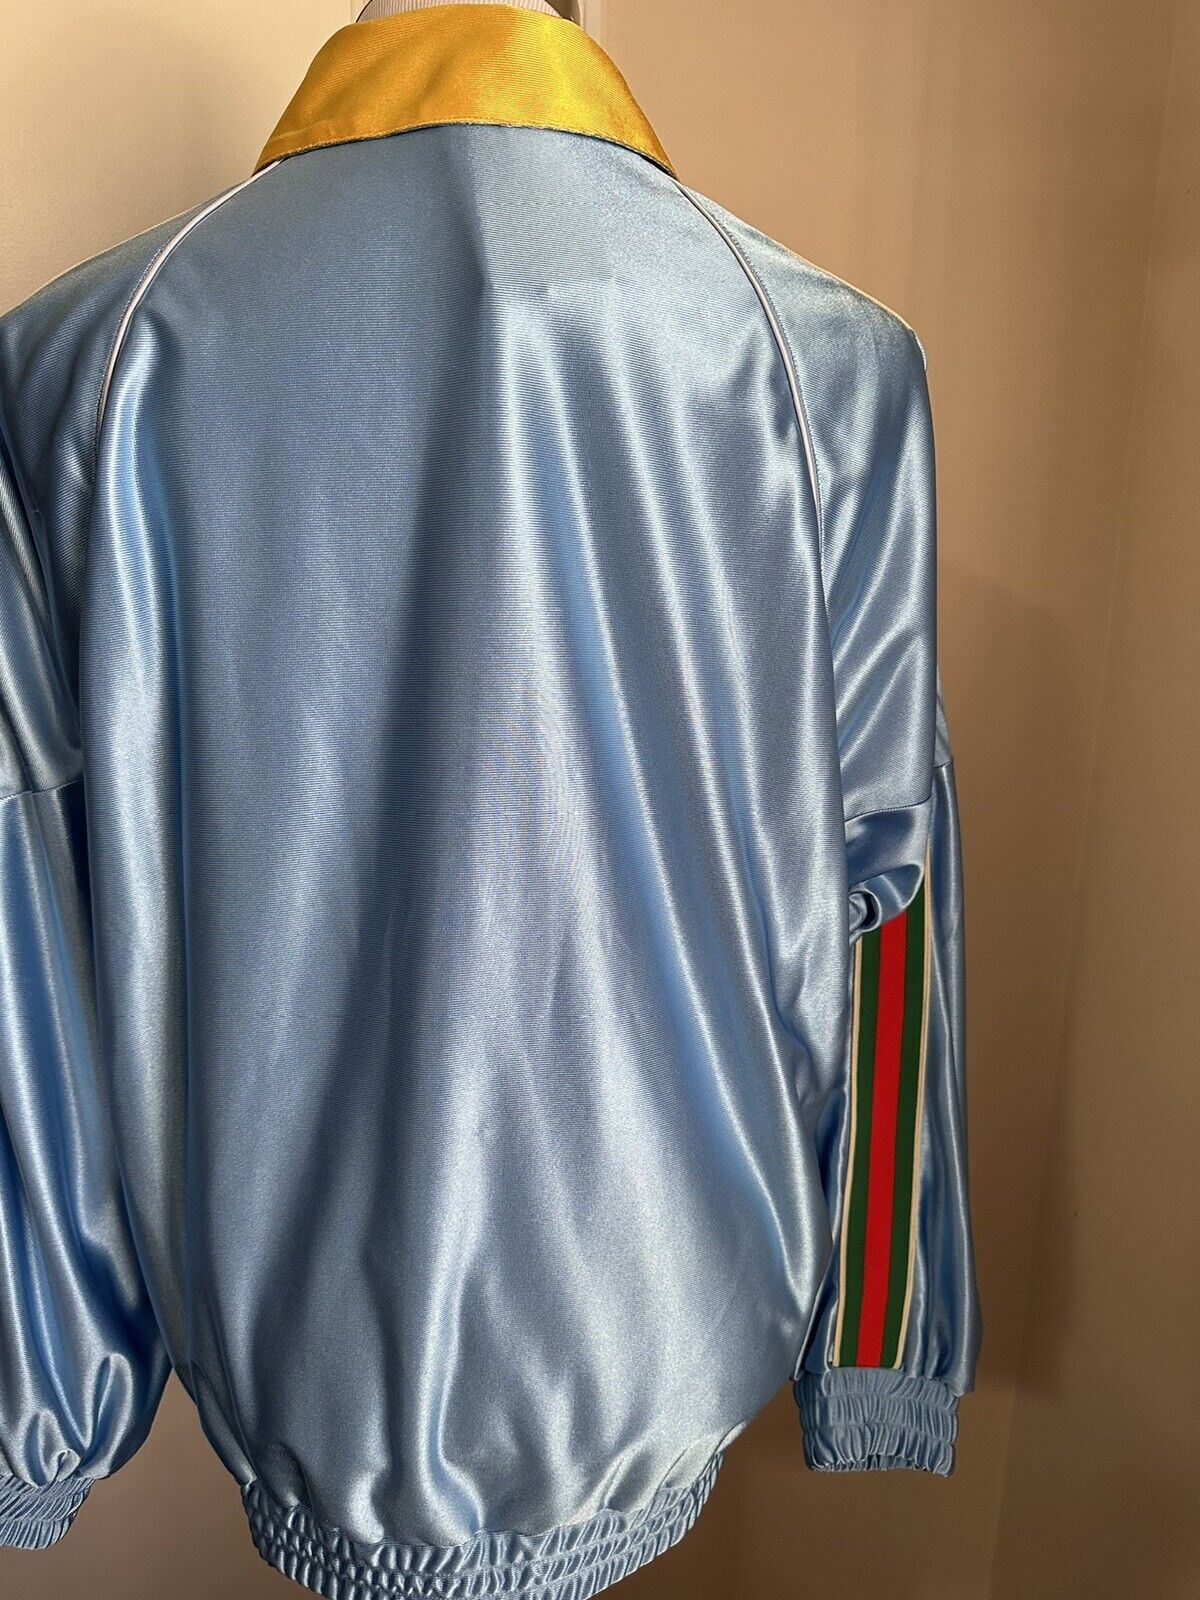 NWT $1650 Gucci Men Oversized Technical Polyester Track Jacket Bright Blue S